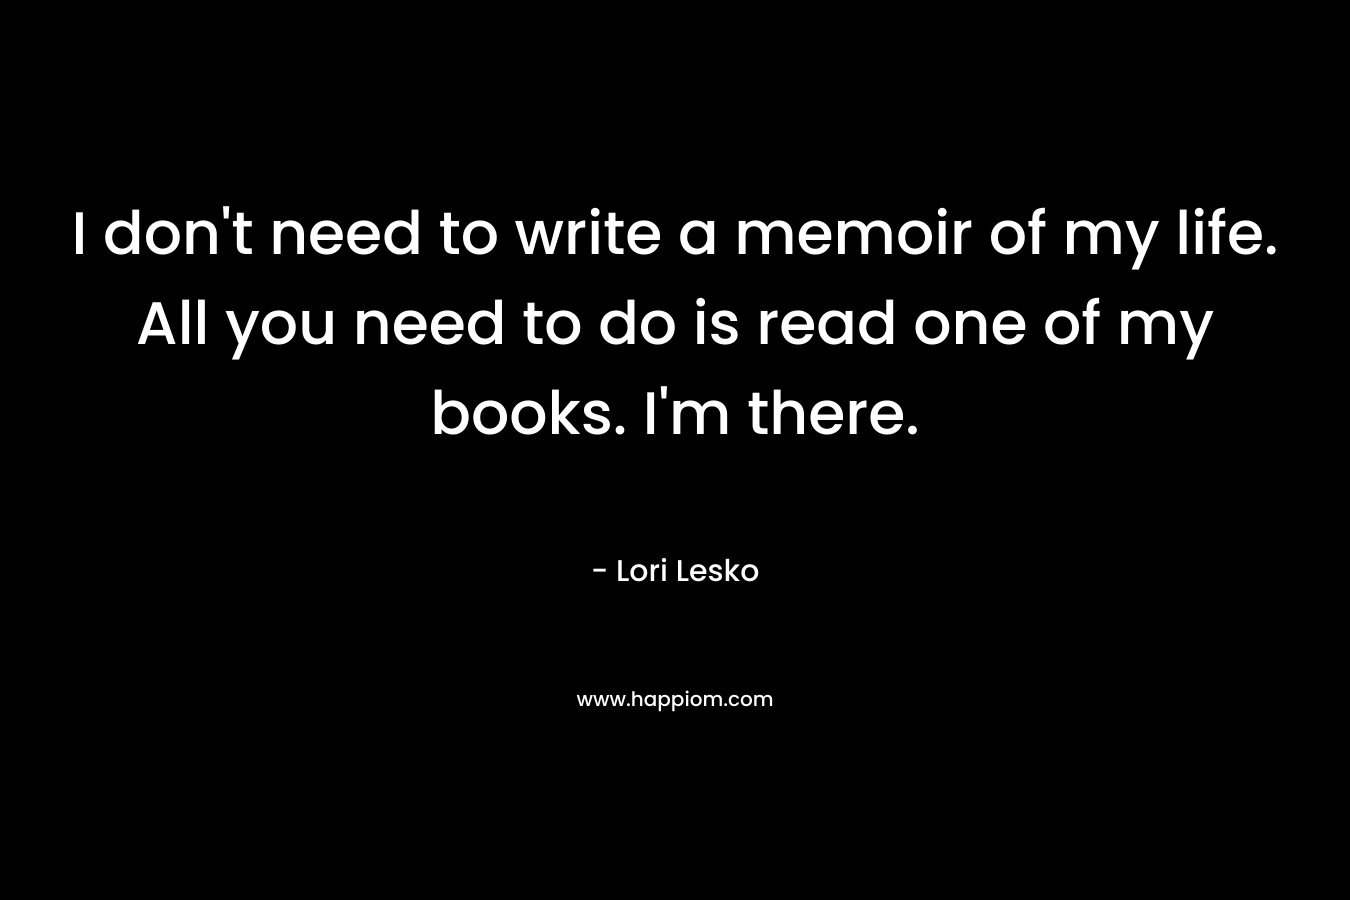 I don't need to write a memoir of my life. All you need to do is read one of my books. I'm there.